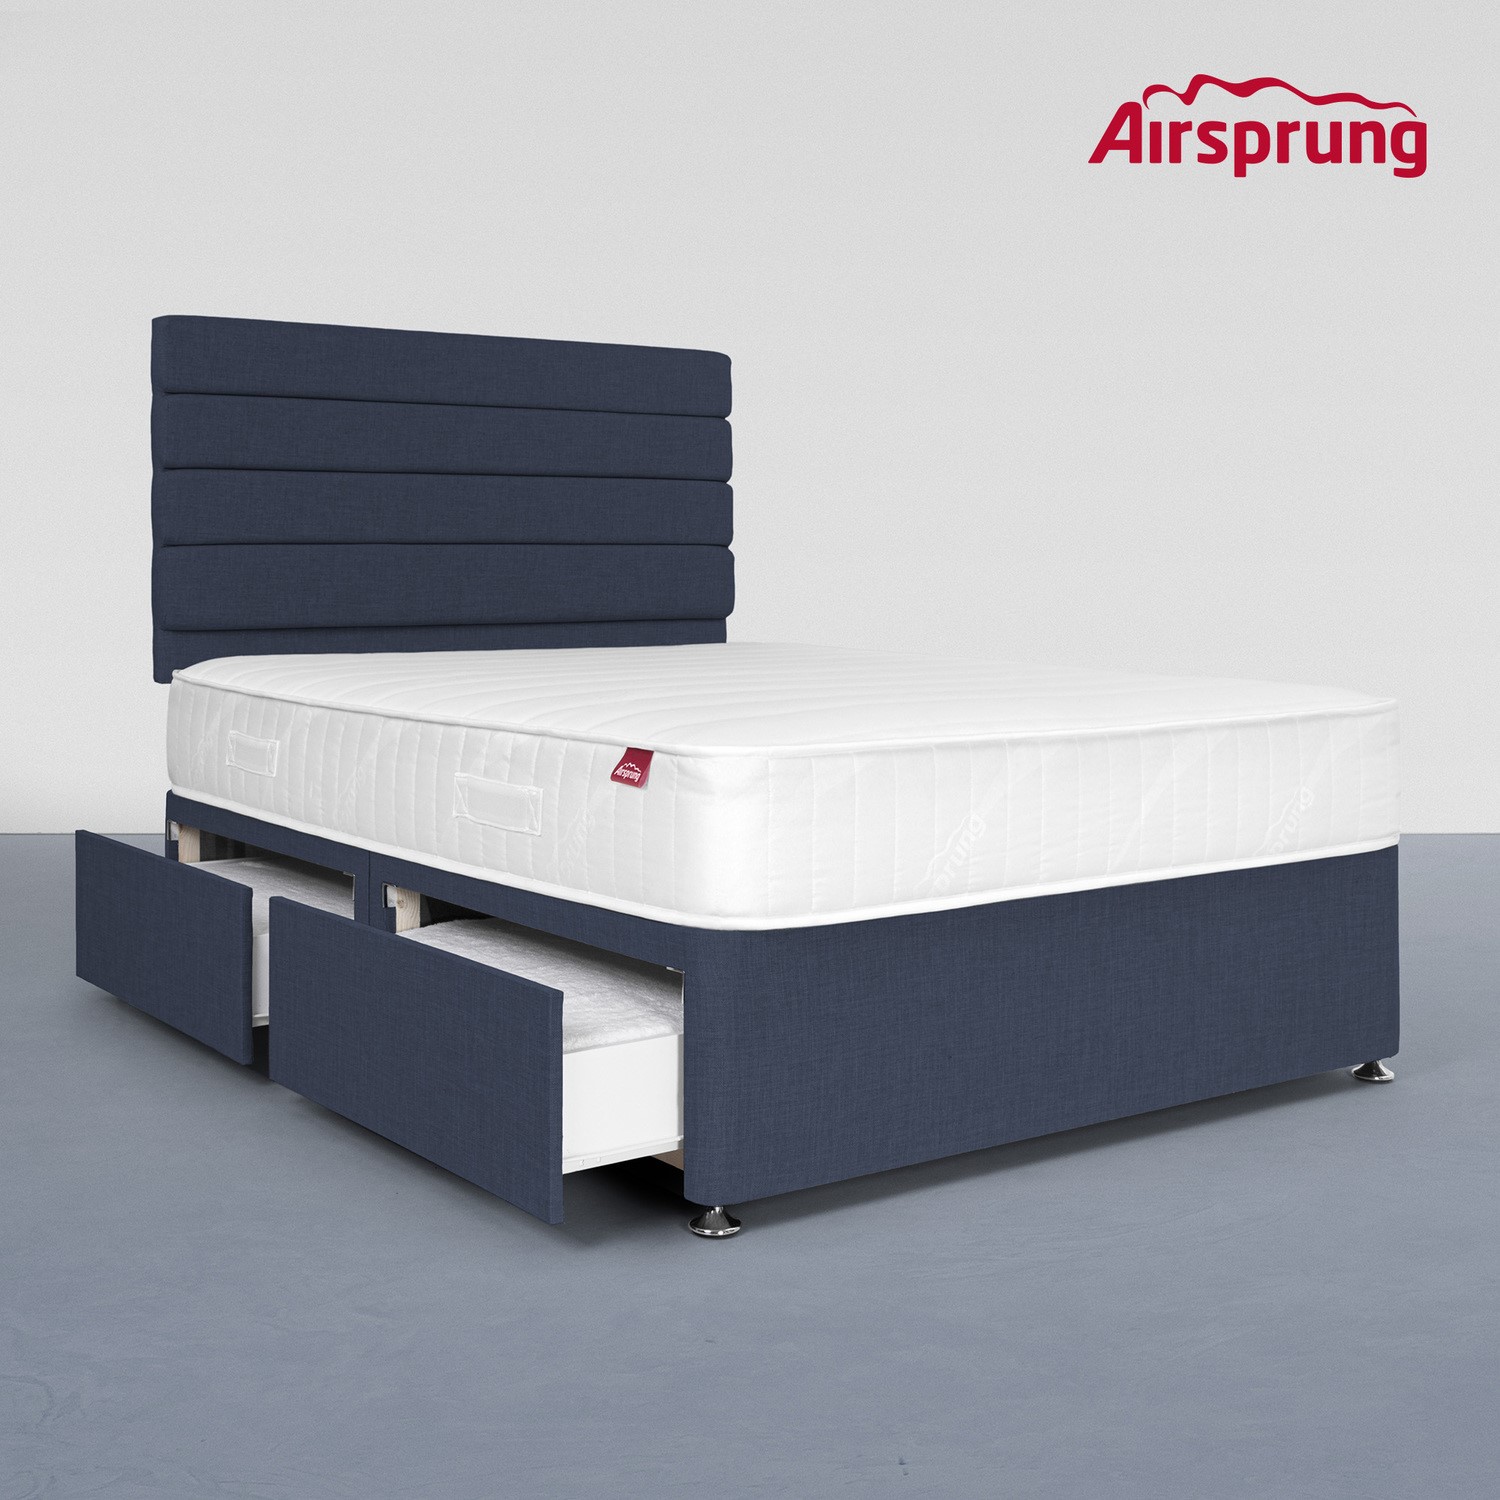 Read more about Airsprung king size 4 drawer divan bed with comfort mattress midnight blue